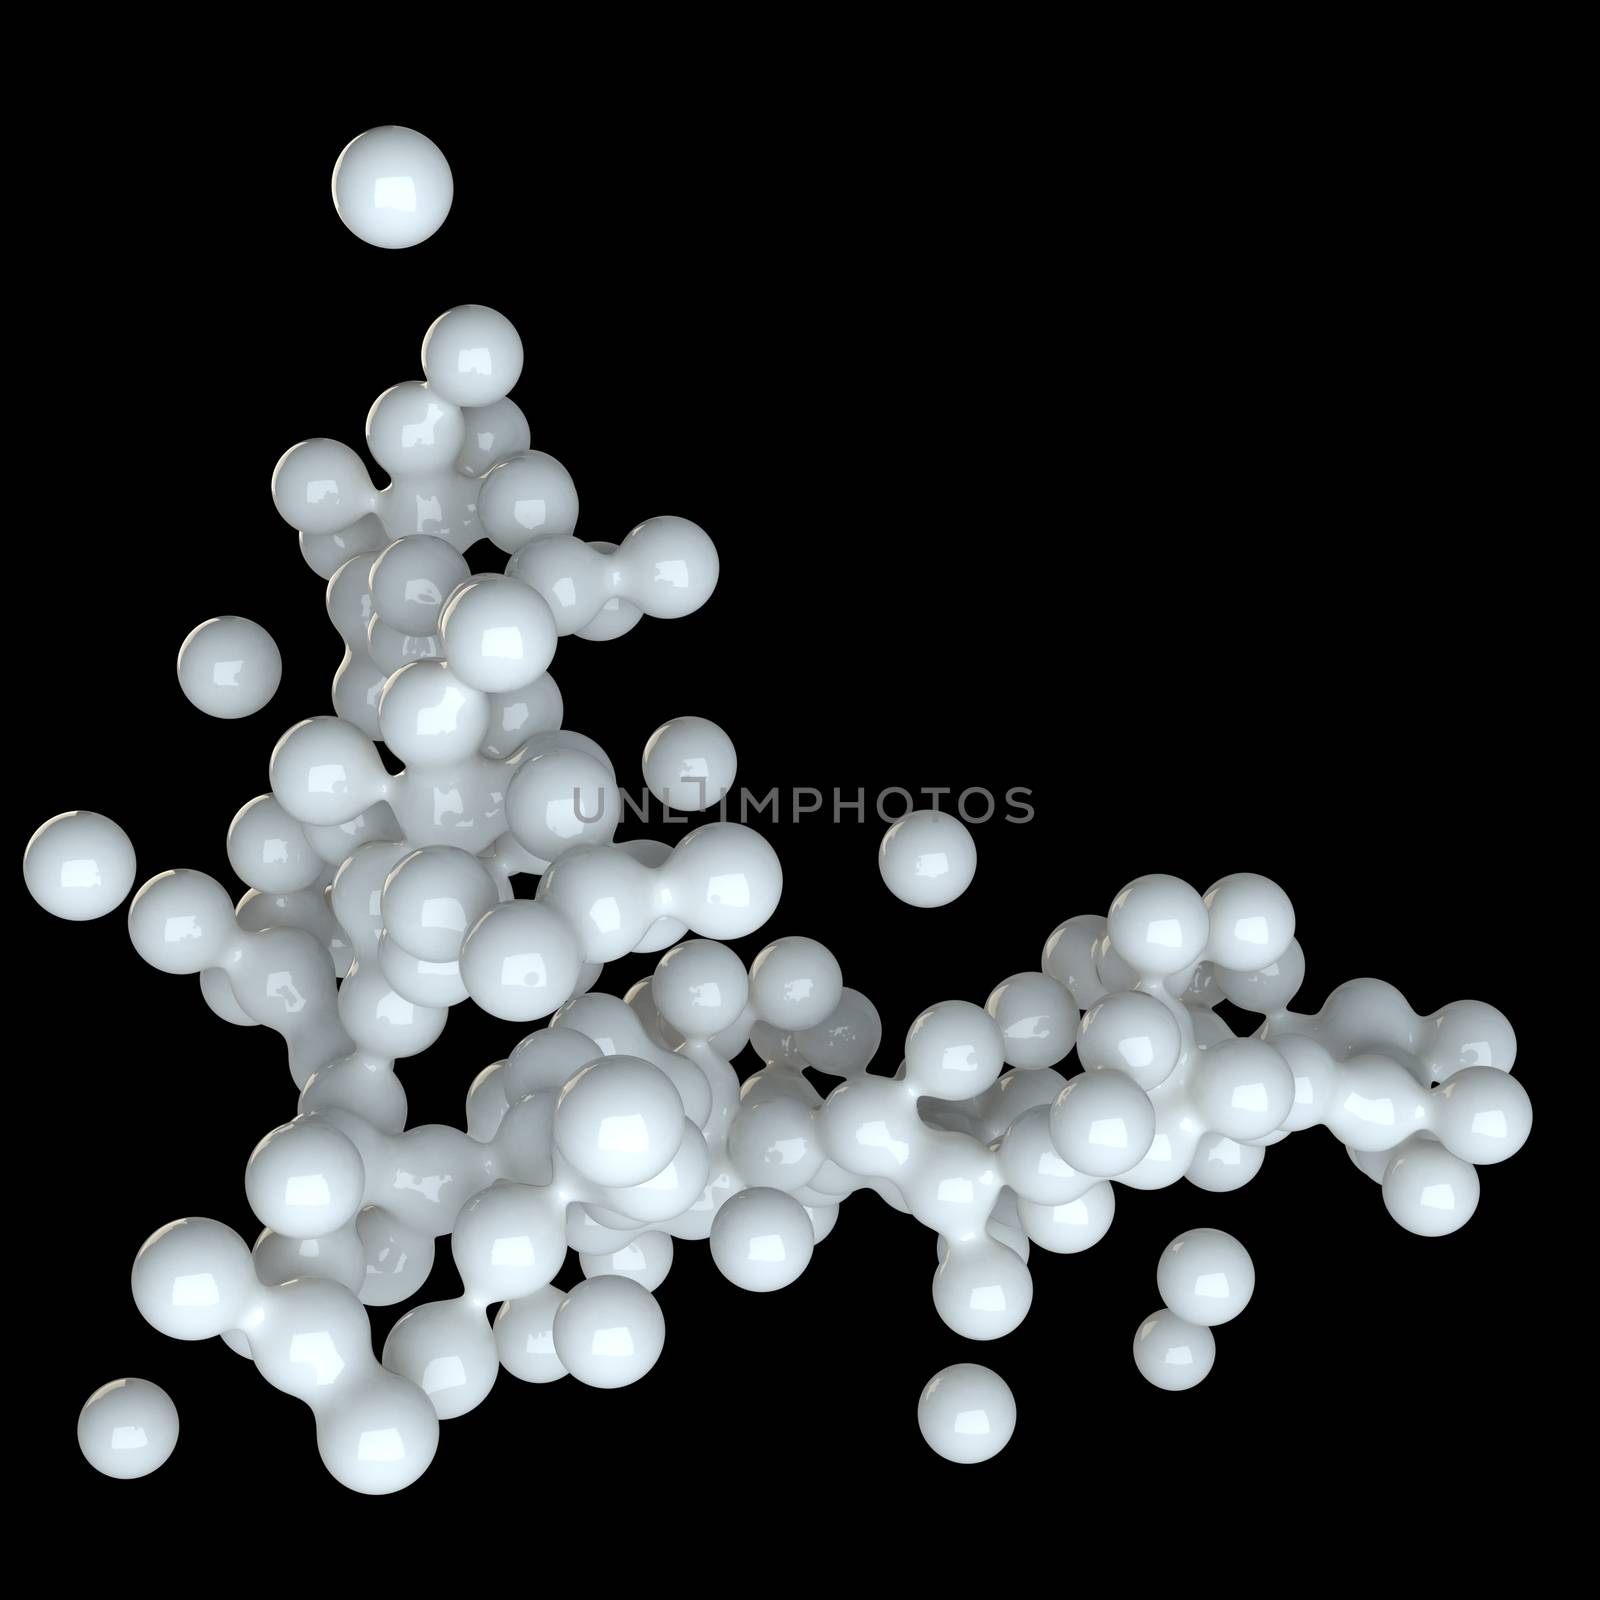 Abstract background with glossy balls. Black background. 3D illustration for your design